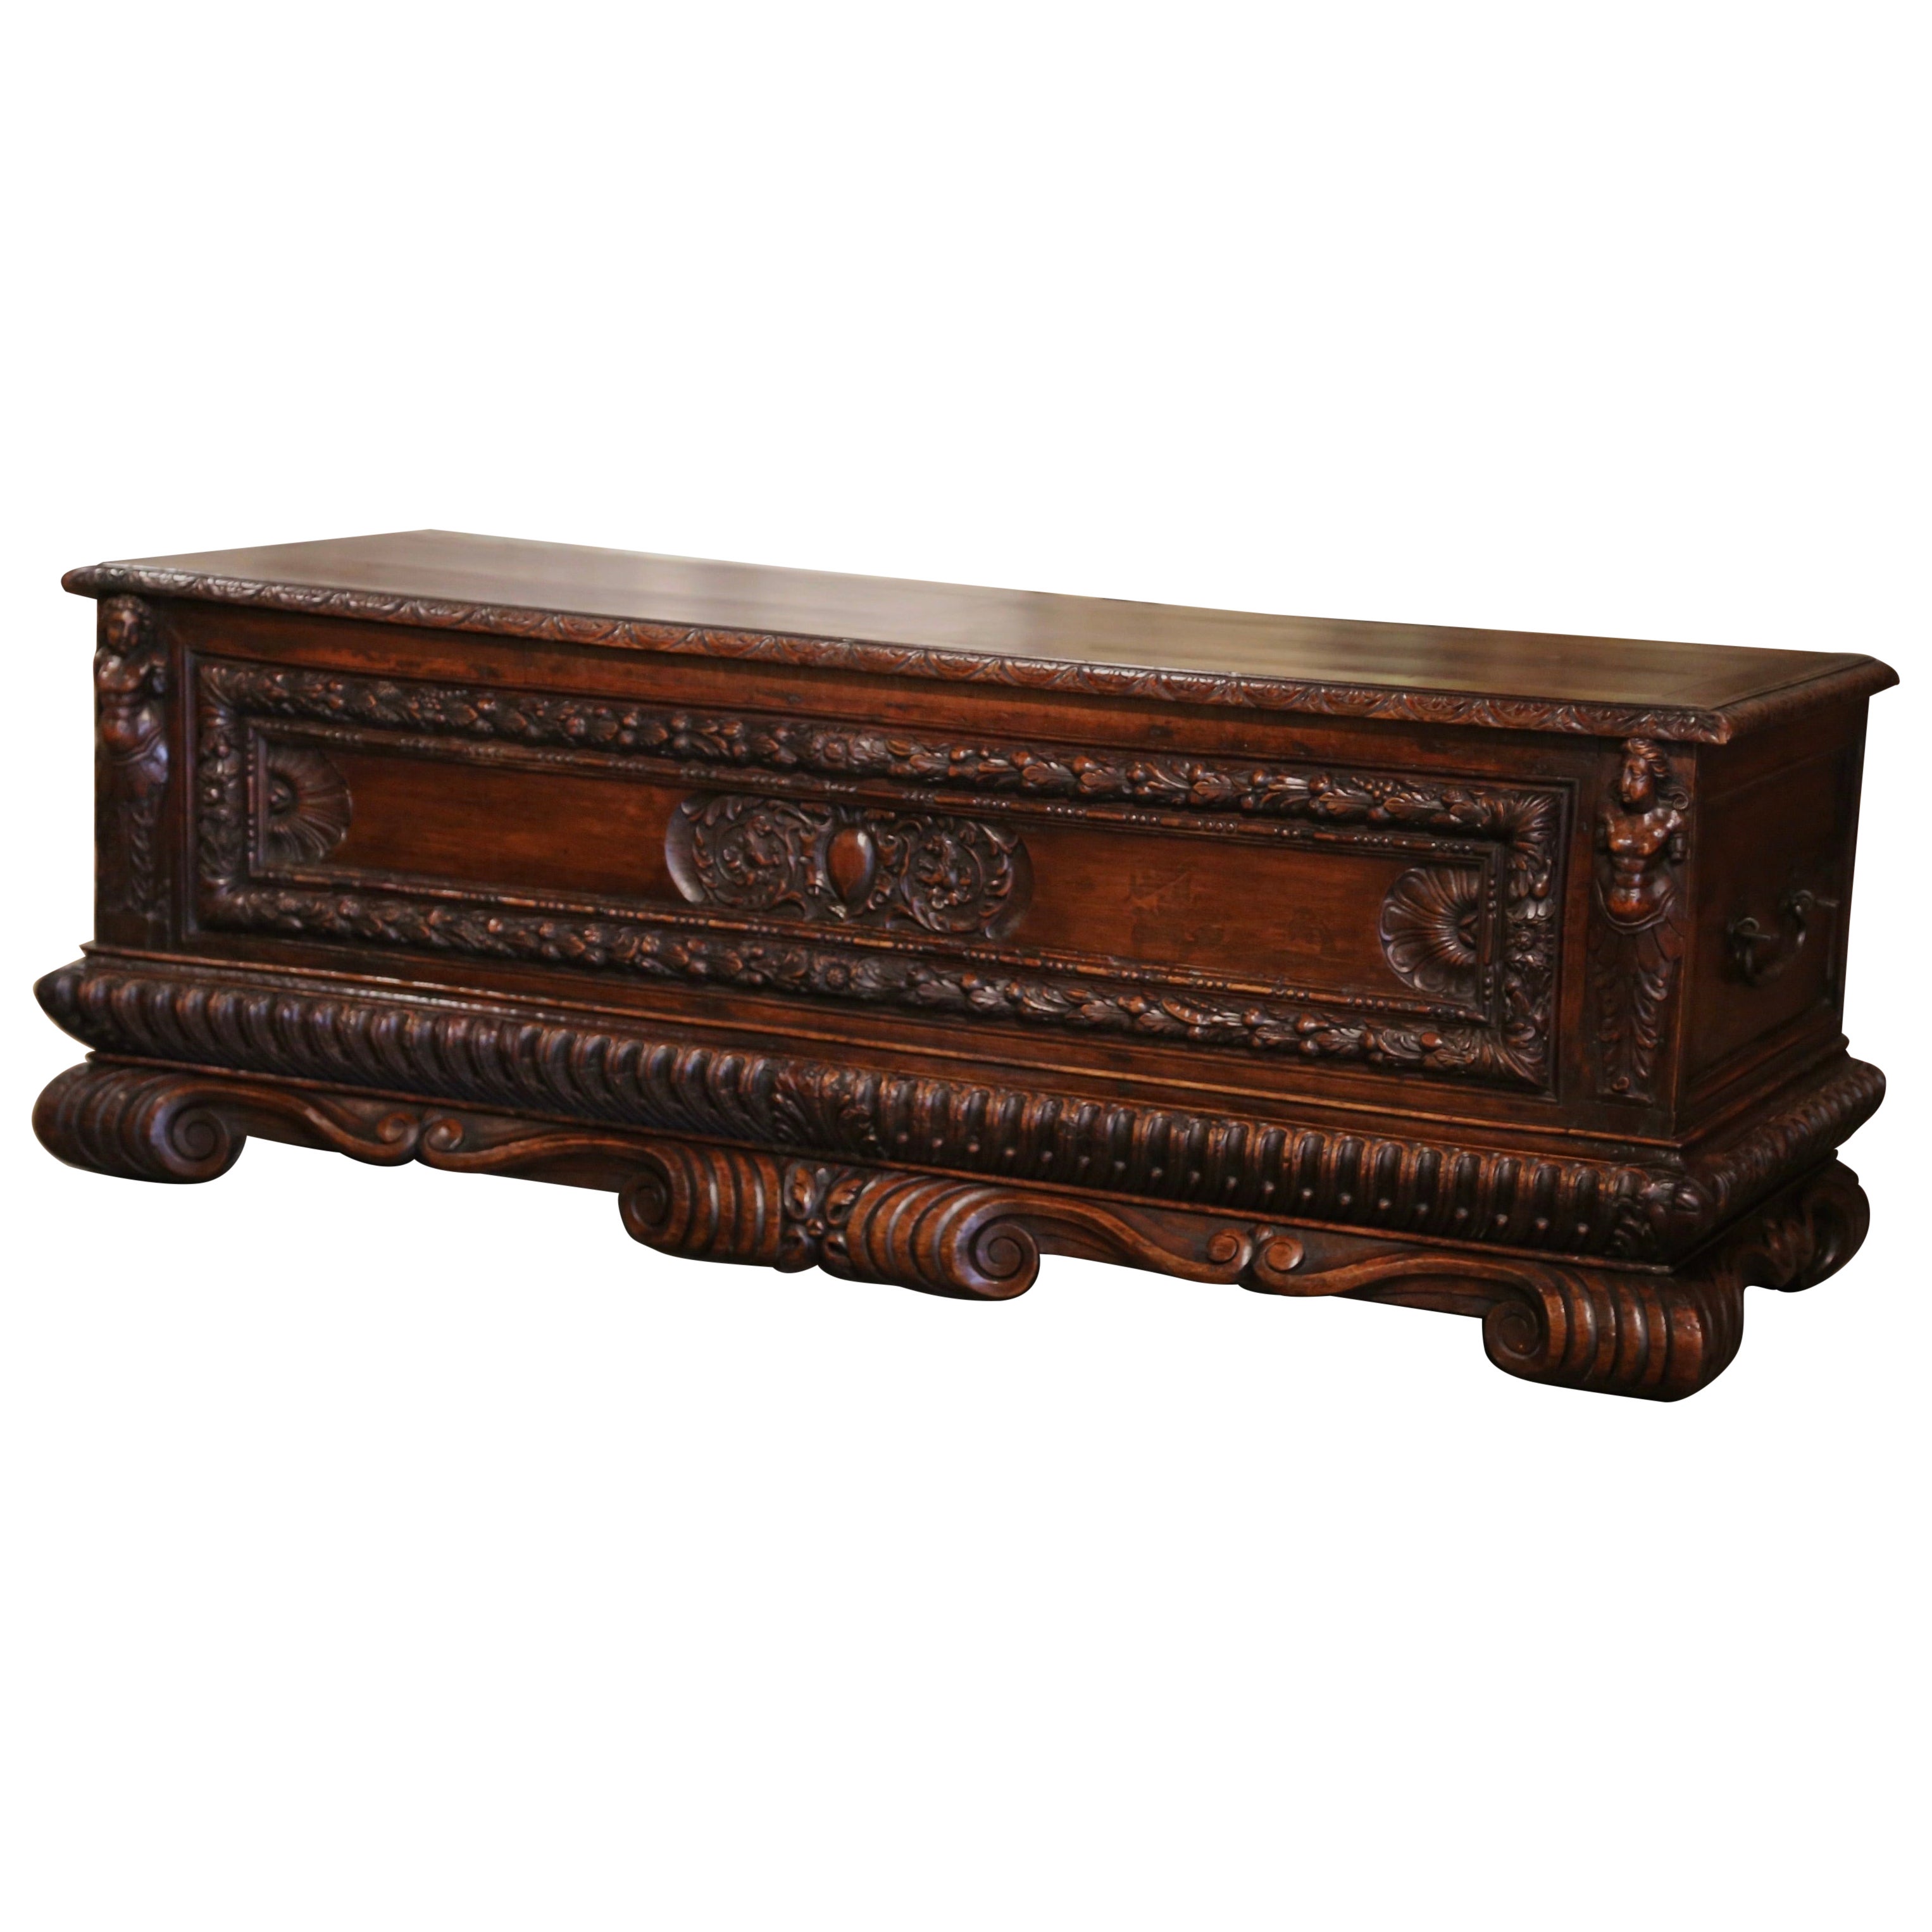 Early 19th Century Italian Carved Walnut "Cassone" Blanket Chest Trunk For Sale